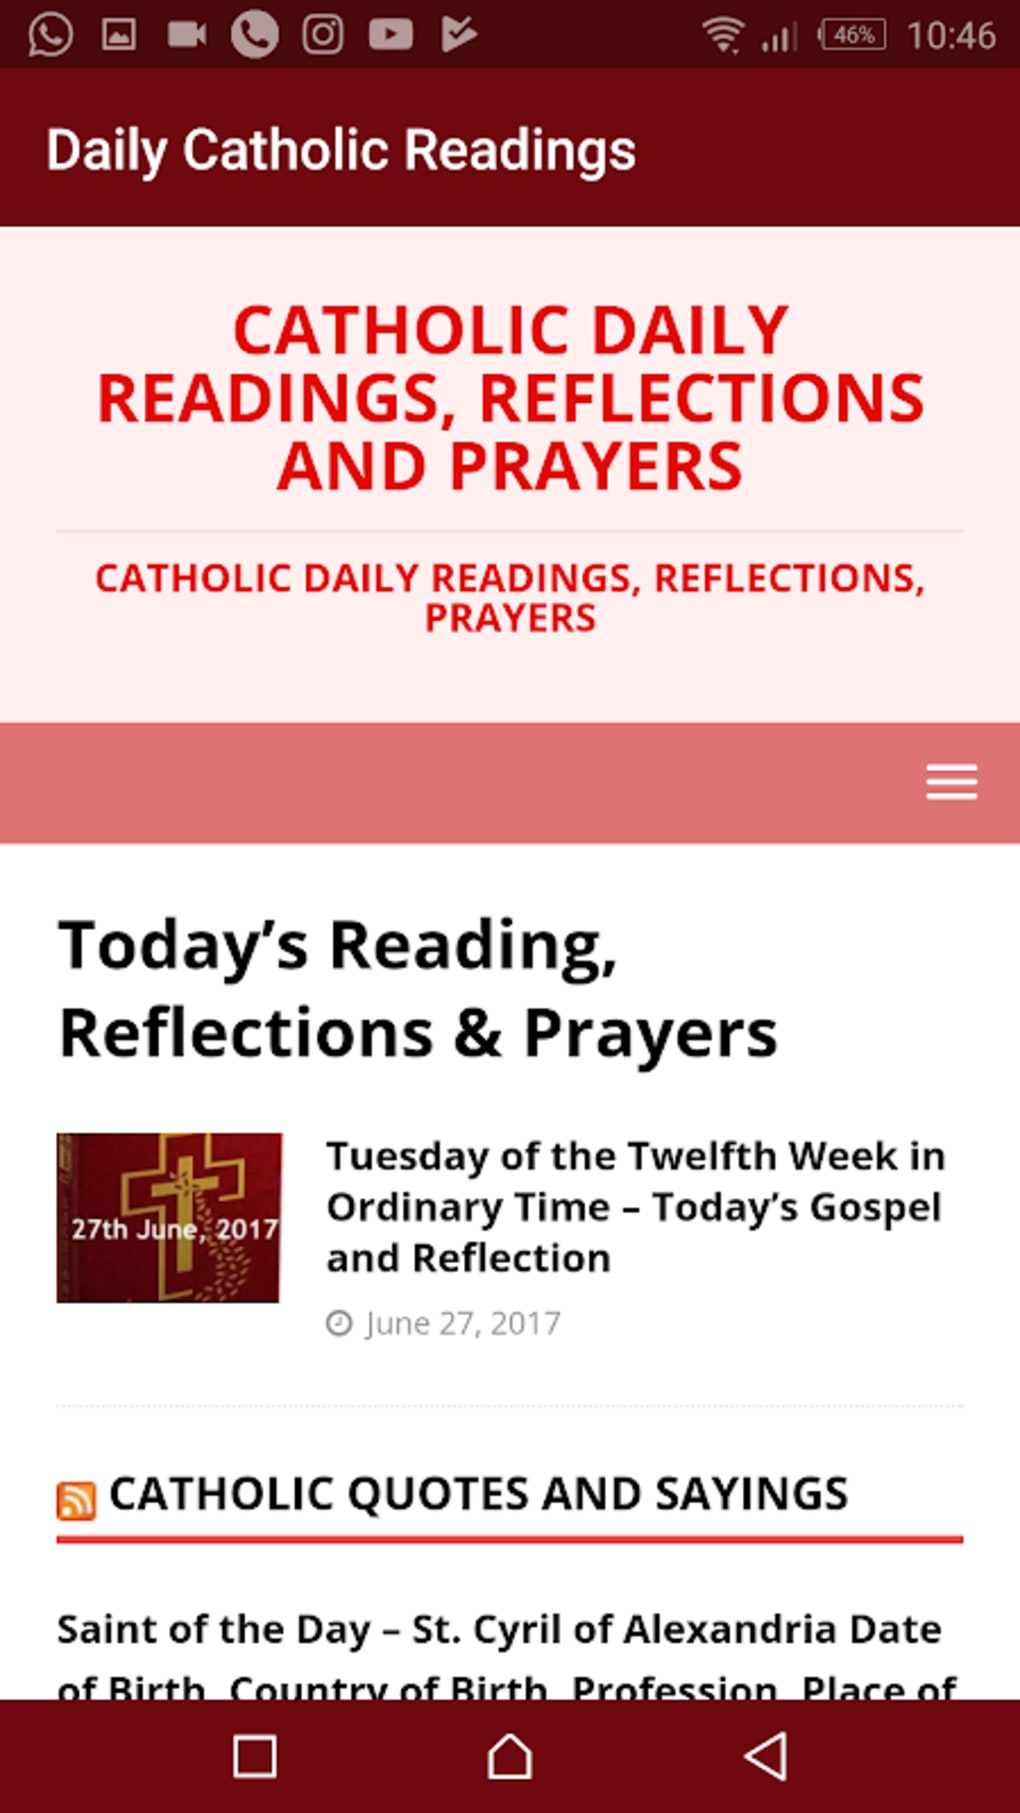 Daily Catholic Readings, Reflections and Prayers APK لنظام Android تنزيل